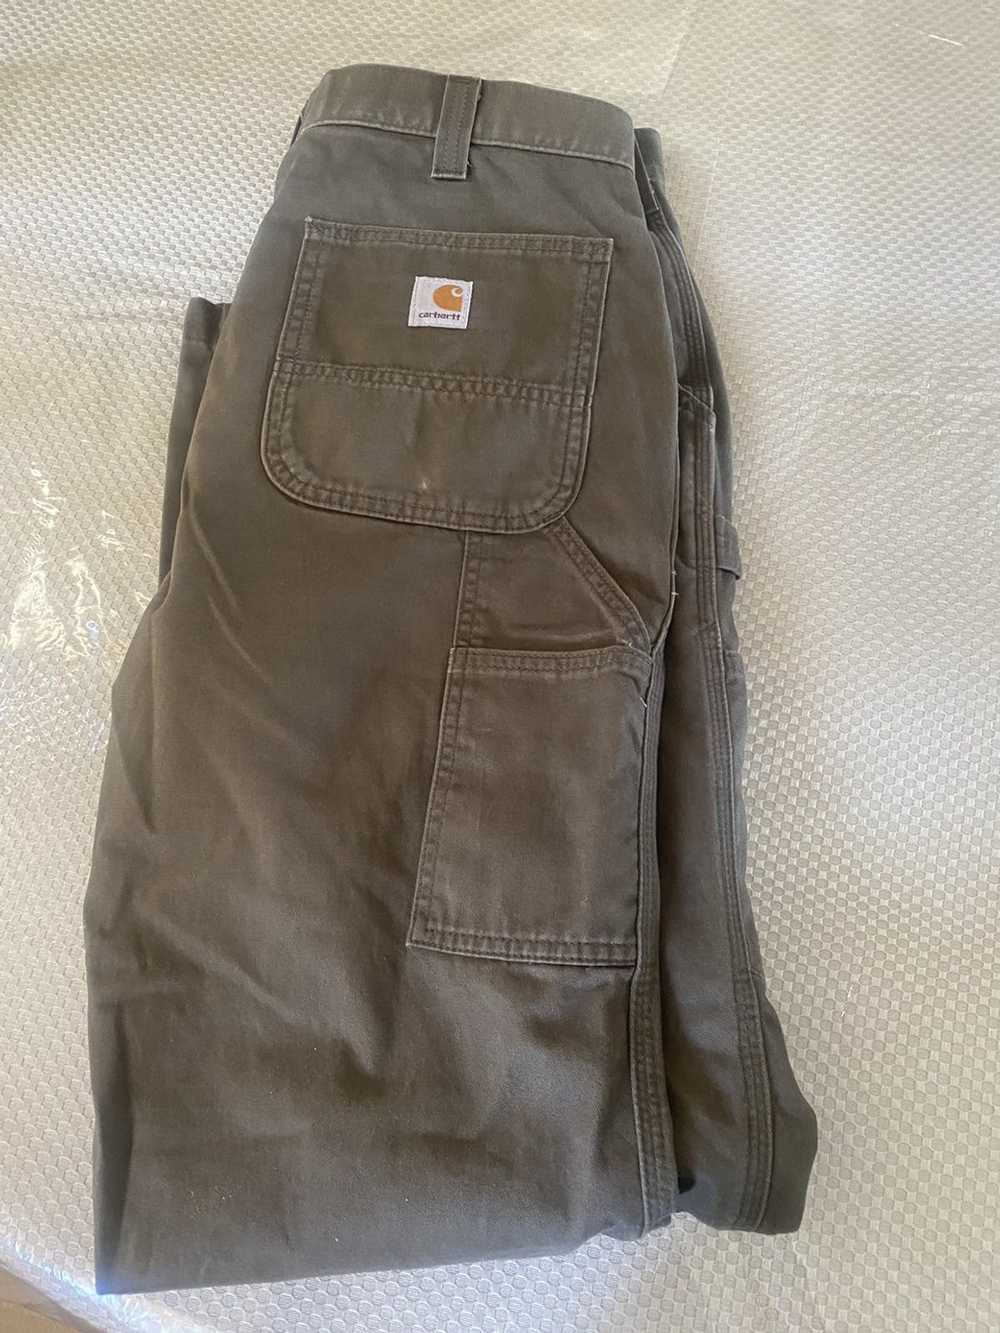 Carhartt Mens Relaxed Fit Twill Utility Work Pant Carpenter Flex 41x26  Coffee